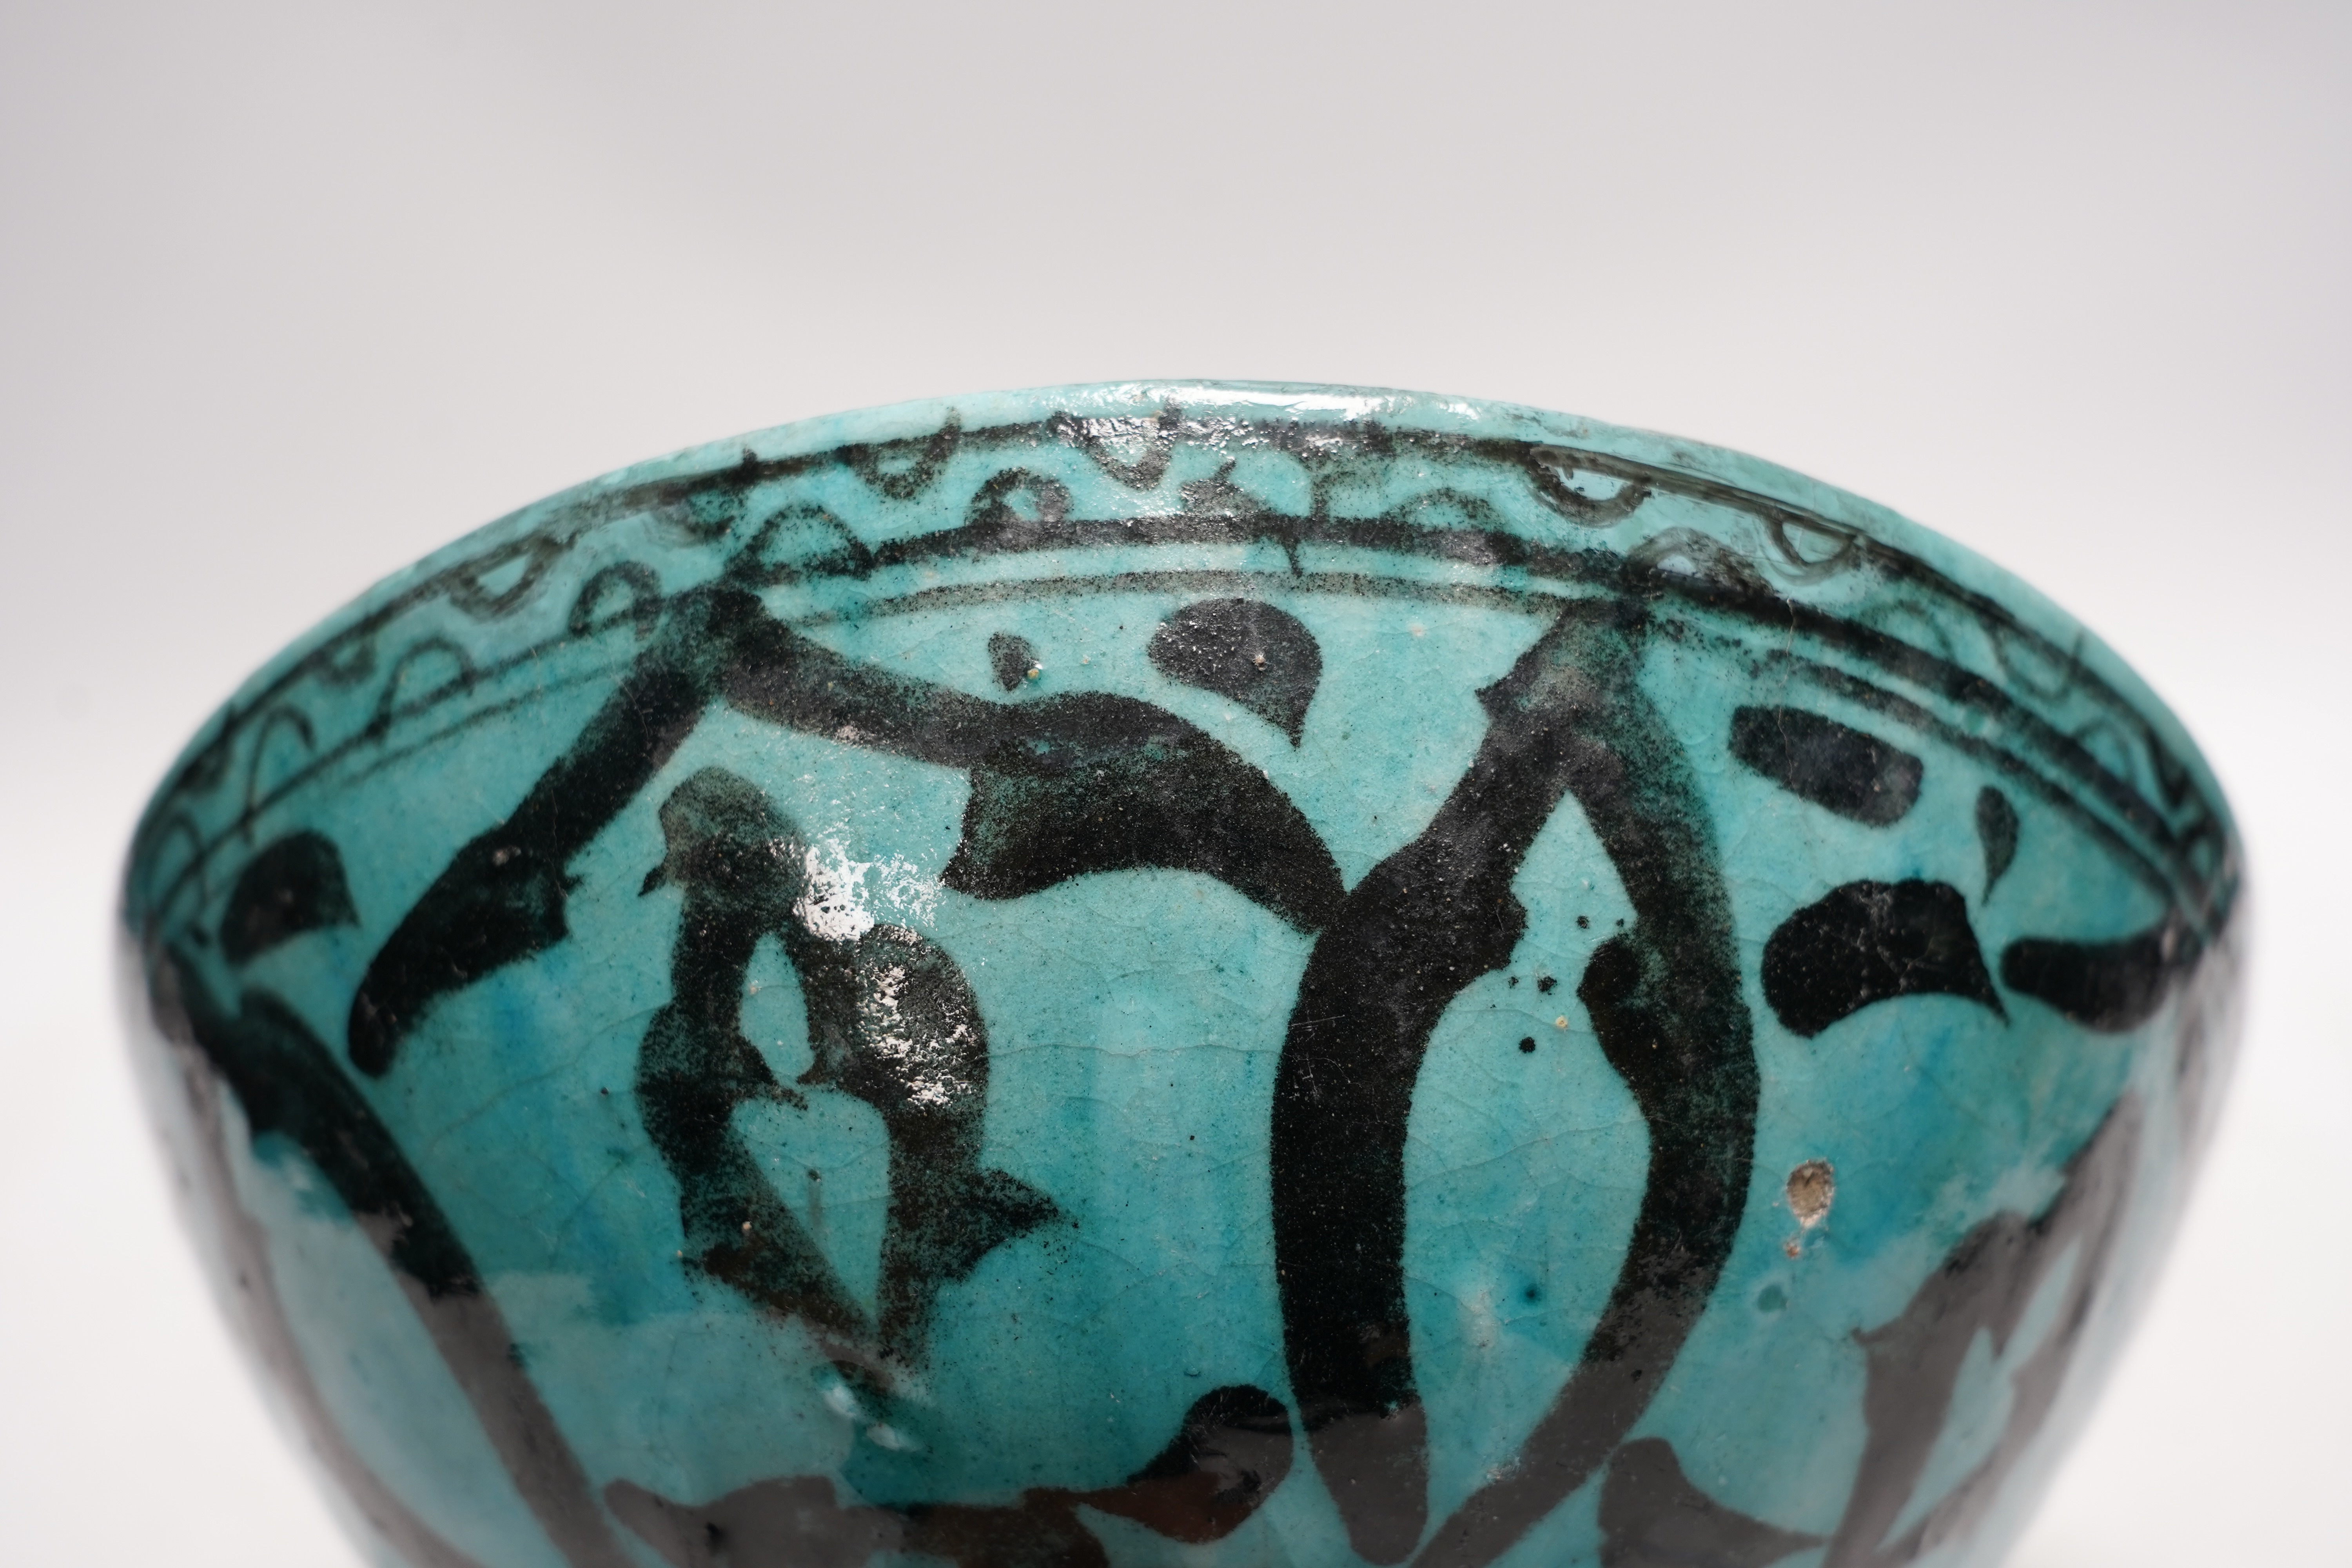 A Kashan turquoise glazed fritware bowl, Persia, 13th/14th century, 25cm diameter